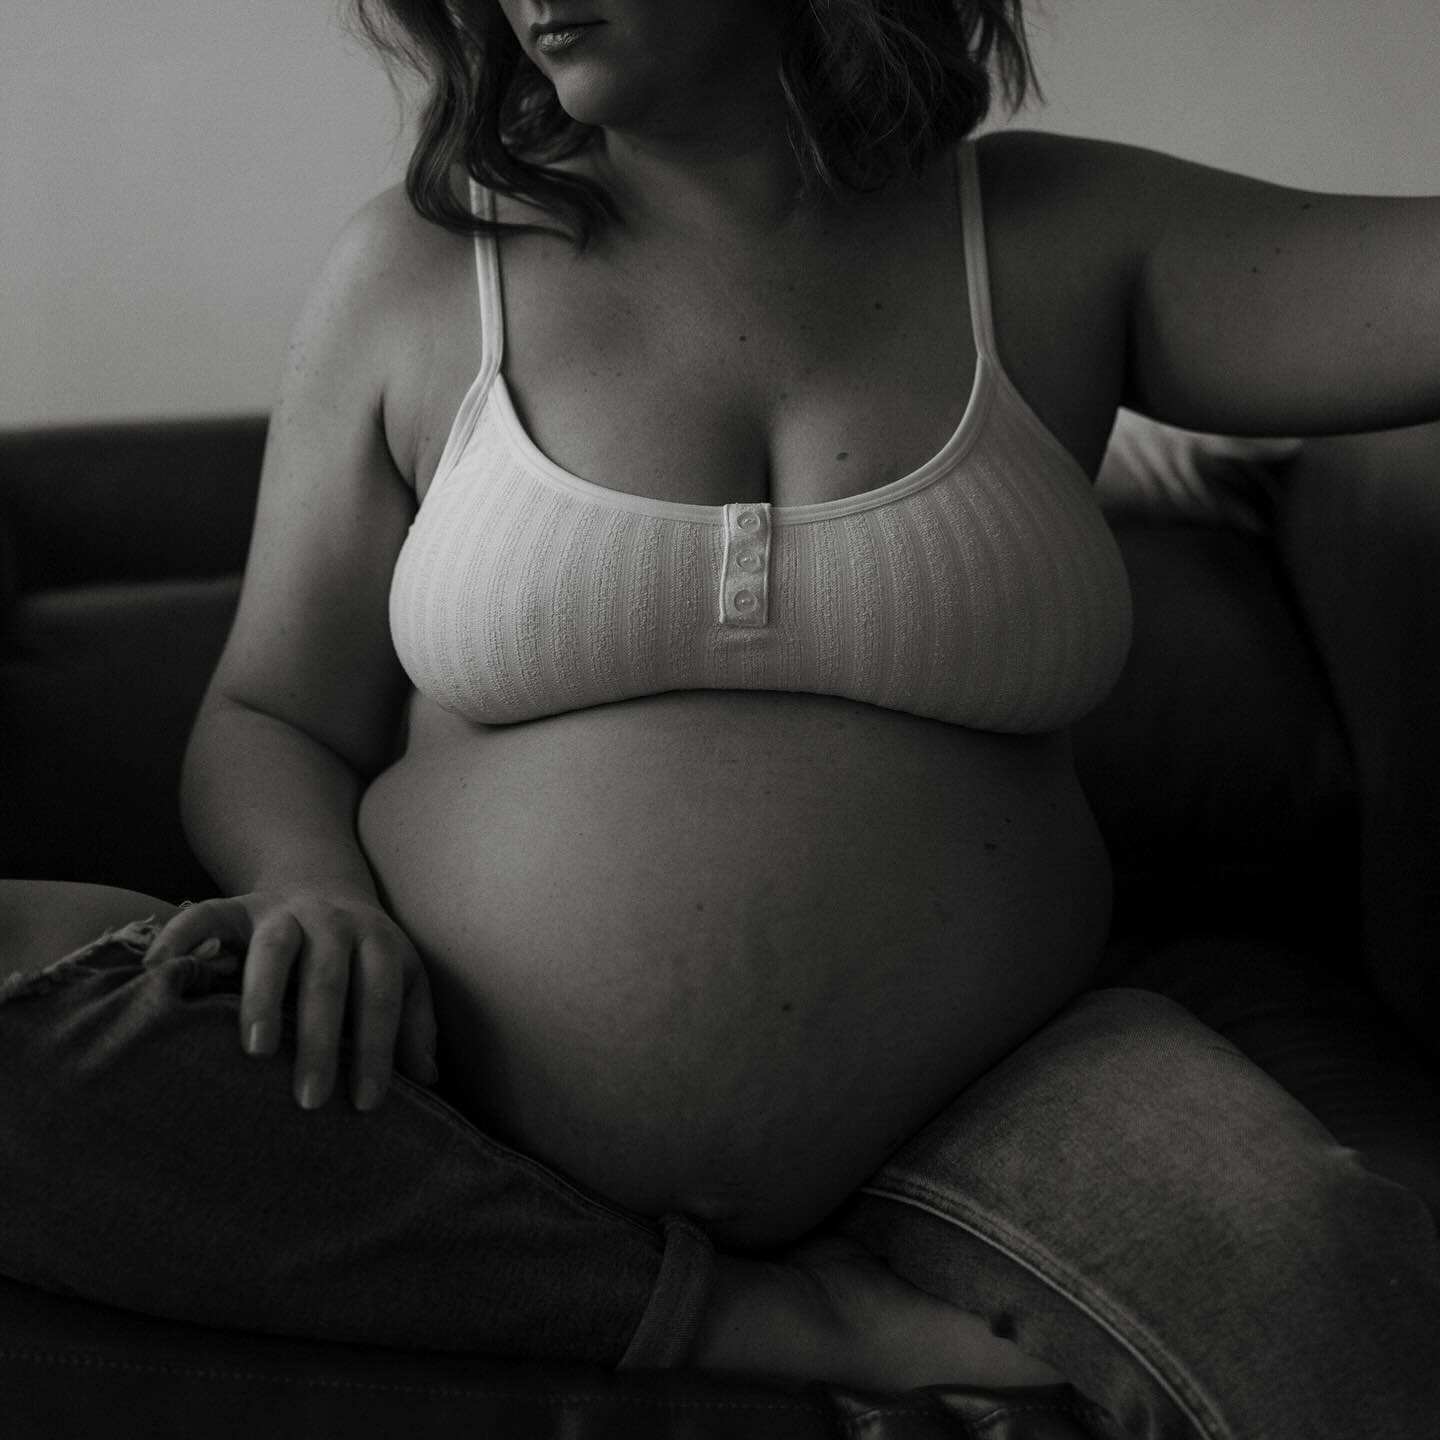 ✨ Hey love, let&rsquo;s talk boudoir maternity! Those pics capturing our journey? With all the marks and scars and bumps and growth. Embracing the story the entire time. 

Andddd Totally snagged some comfy outfits from Target &ndash; real and cozy, j